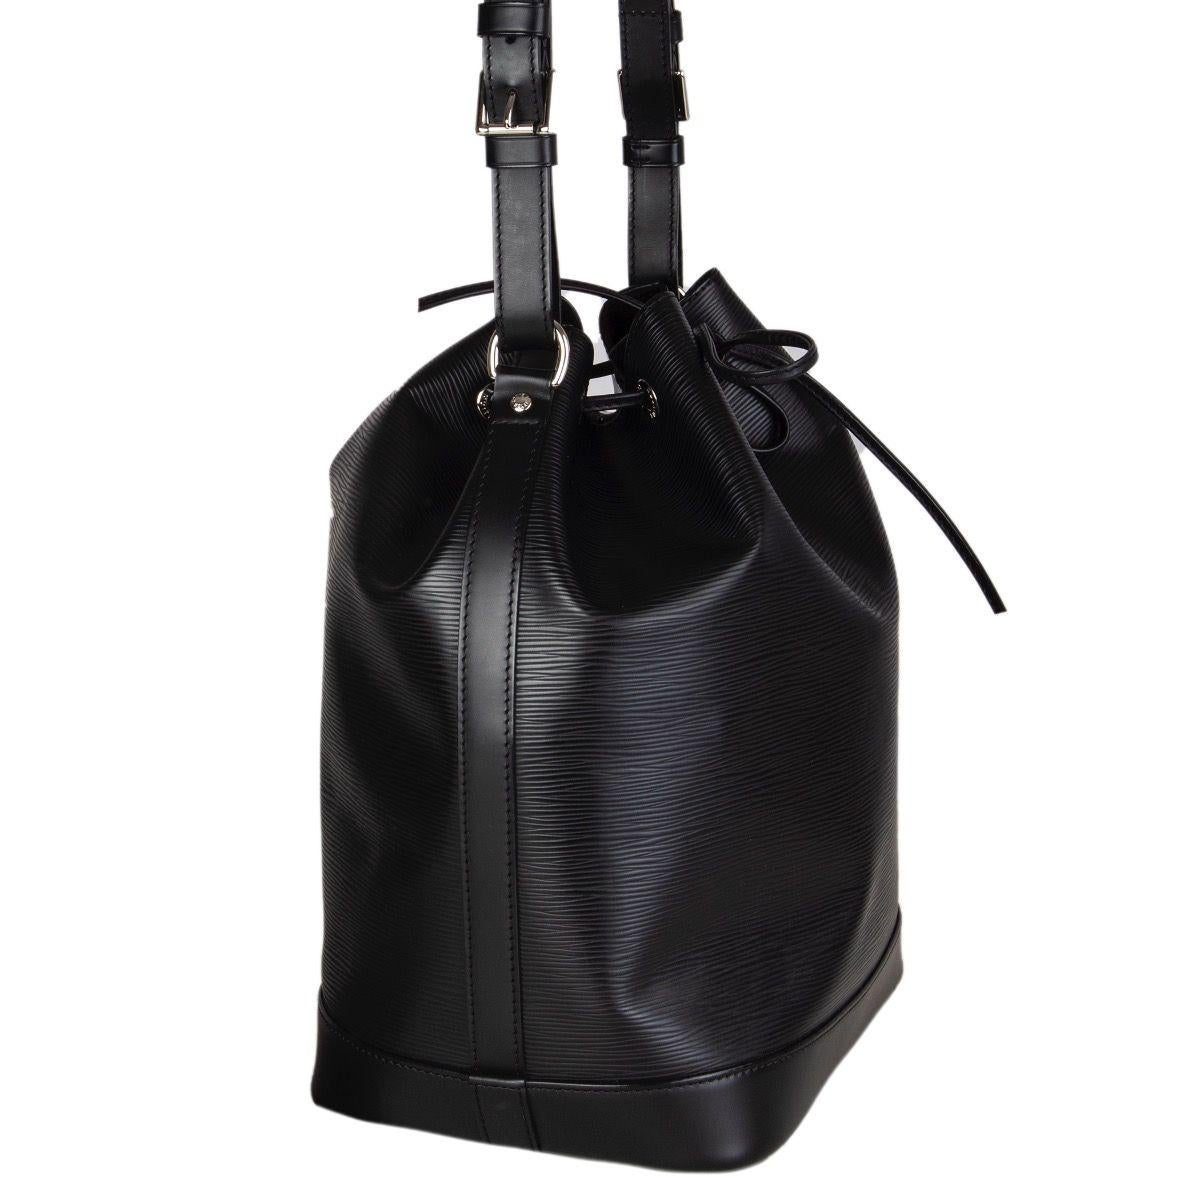 Louis Vuitton 'Sac Noé' in black Epi leather with drawstring closure and silver-tone hardware. Lined in black alcantara with one zipper pocket against the back featuring a D ring on the side. Adjustable shoulder straps. Has been carrid with some